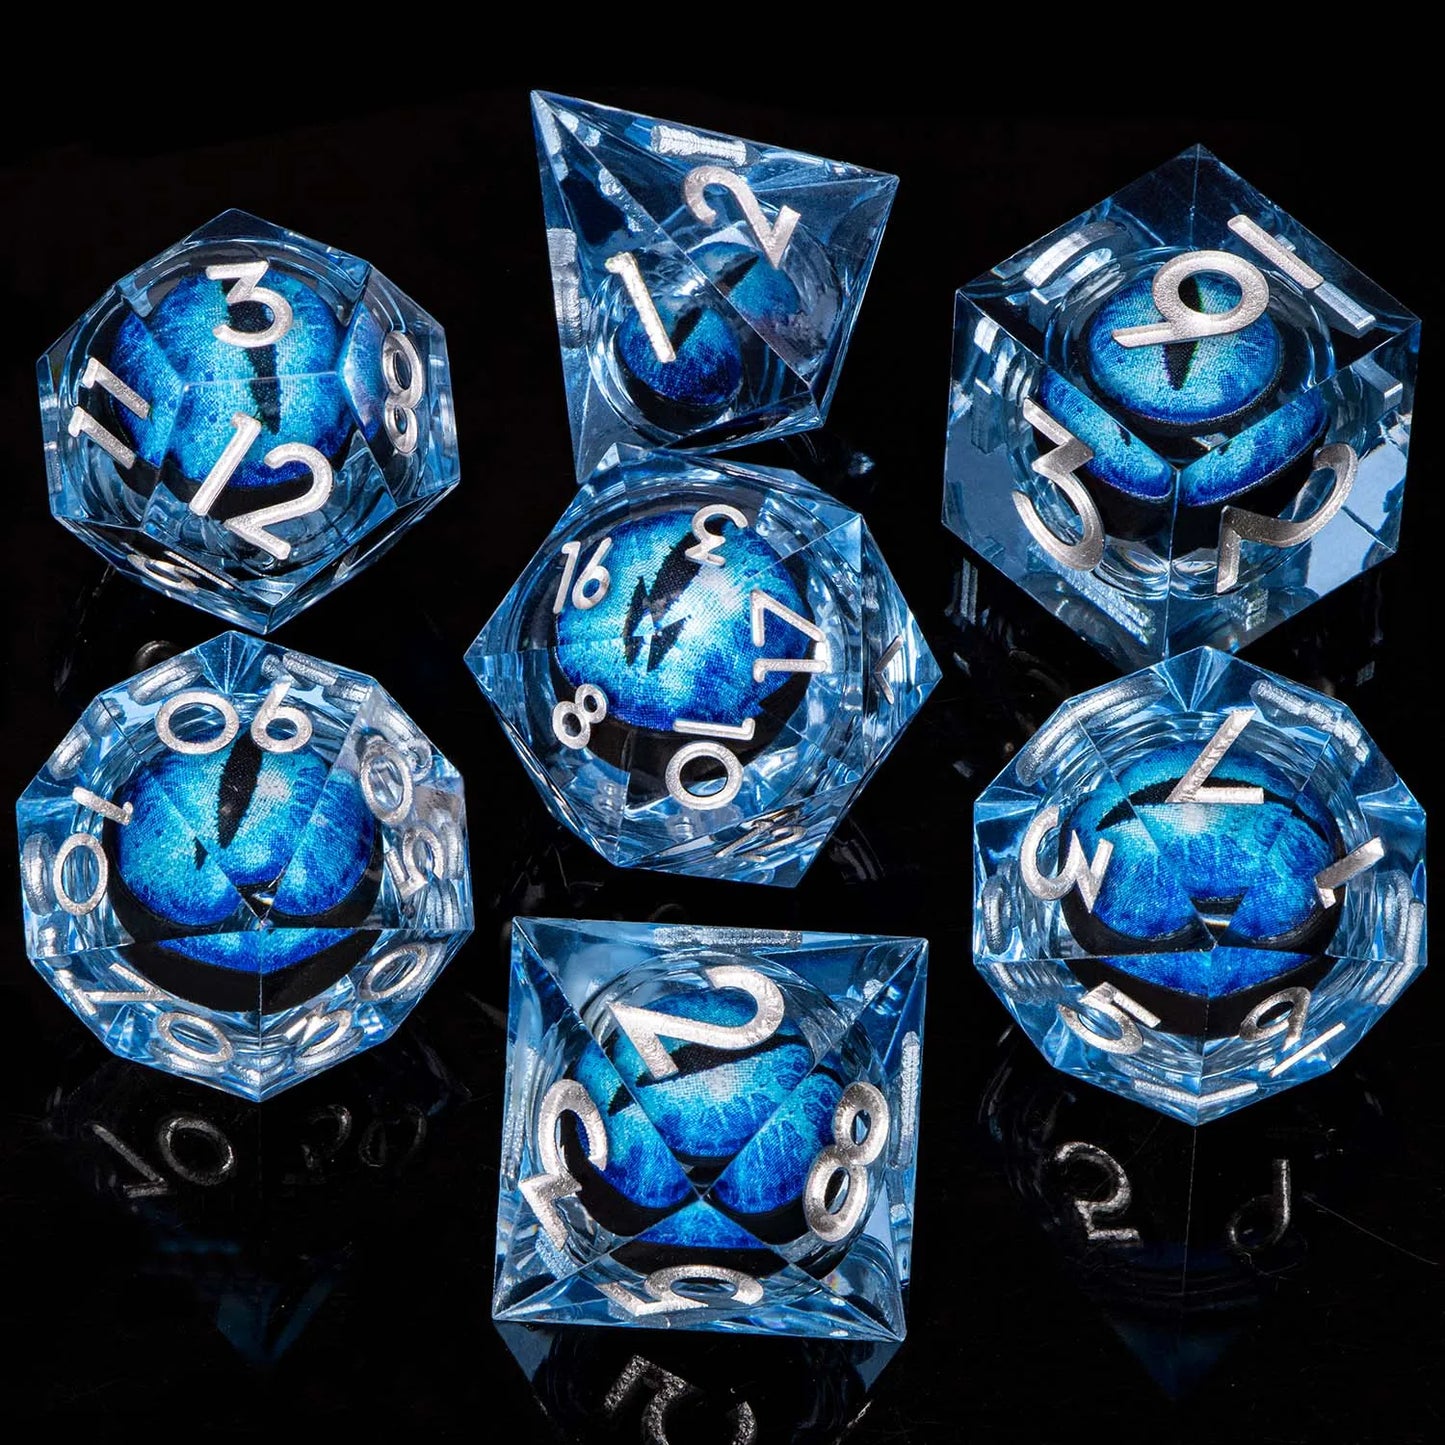 D and D Liquid Flow Core Eye Resin Dice Set | Dnd Dungeon and Dragon Pathfinder Role Playing Game Dice | D20 D&D Red Black Dice YY-05